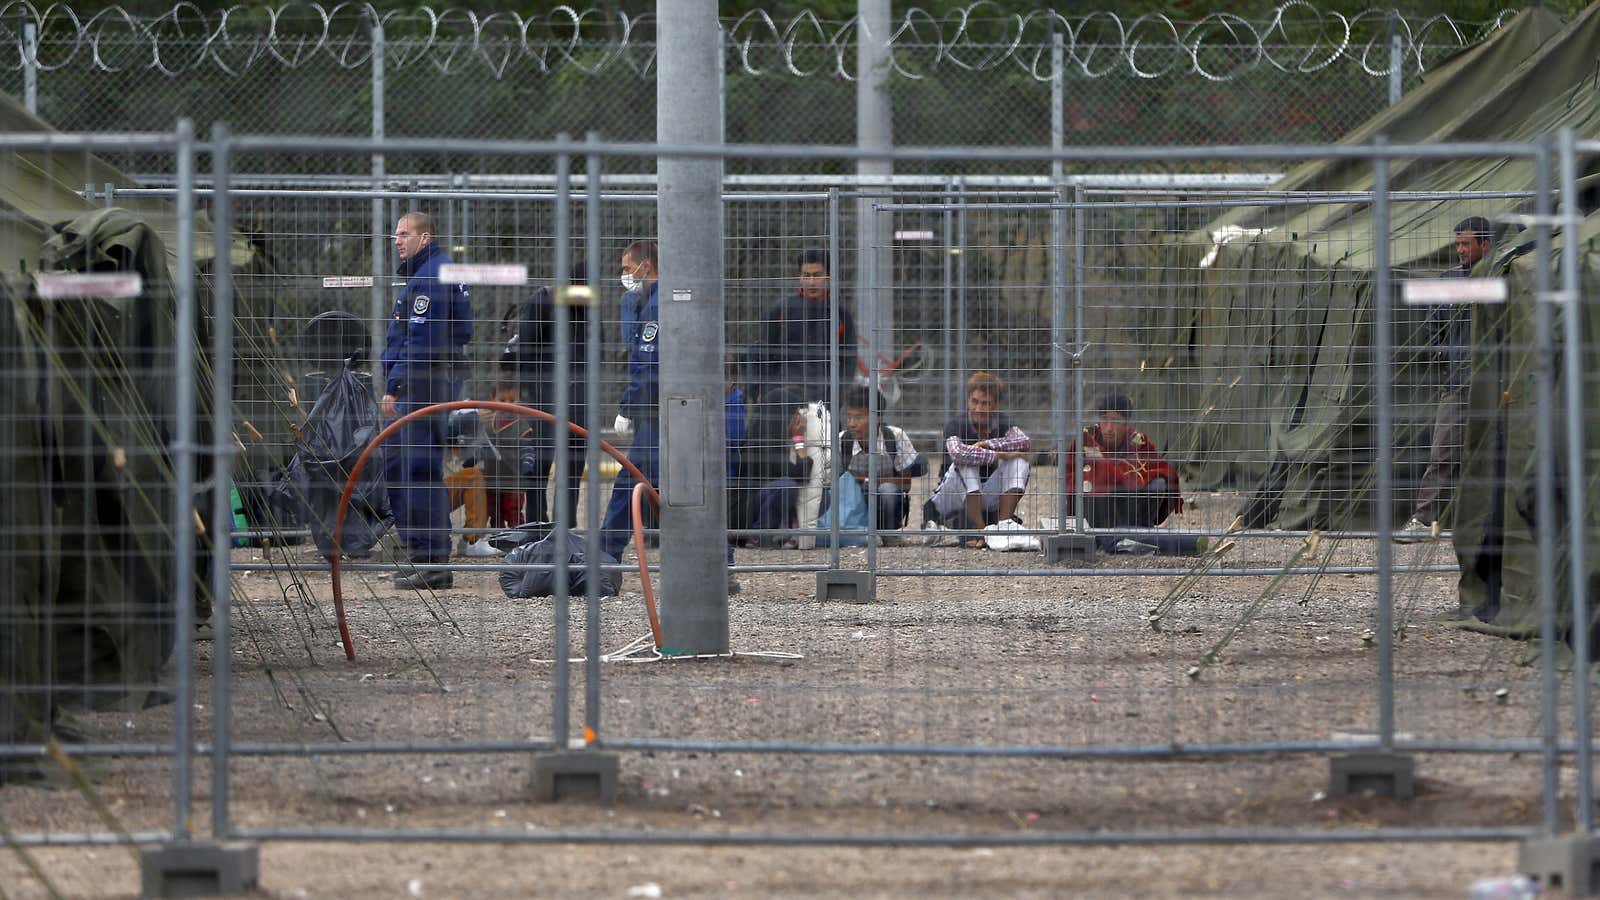 Video: Hungarian police treat refugees “like animals,” caging them and throwing food